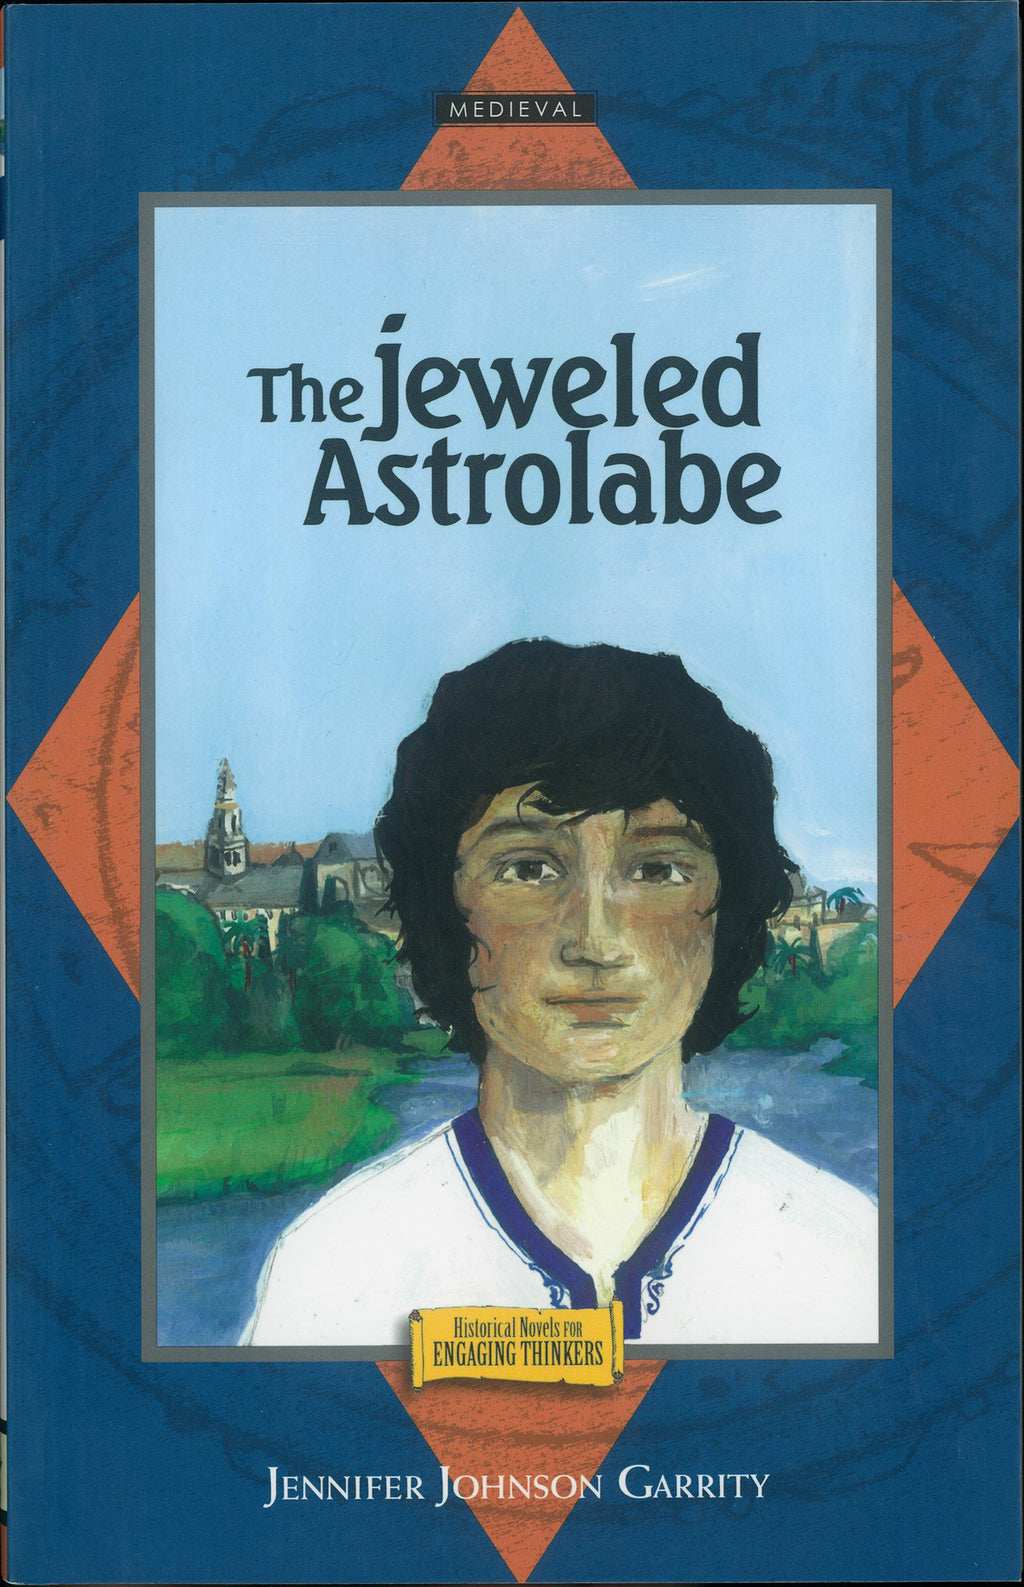 Historical Novel for Engaging Thinkers 2 - The Jeweled Astrolabe